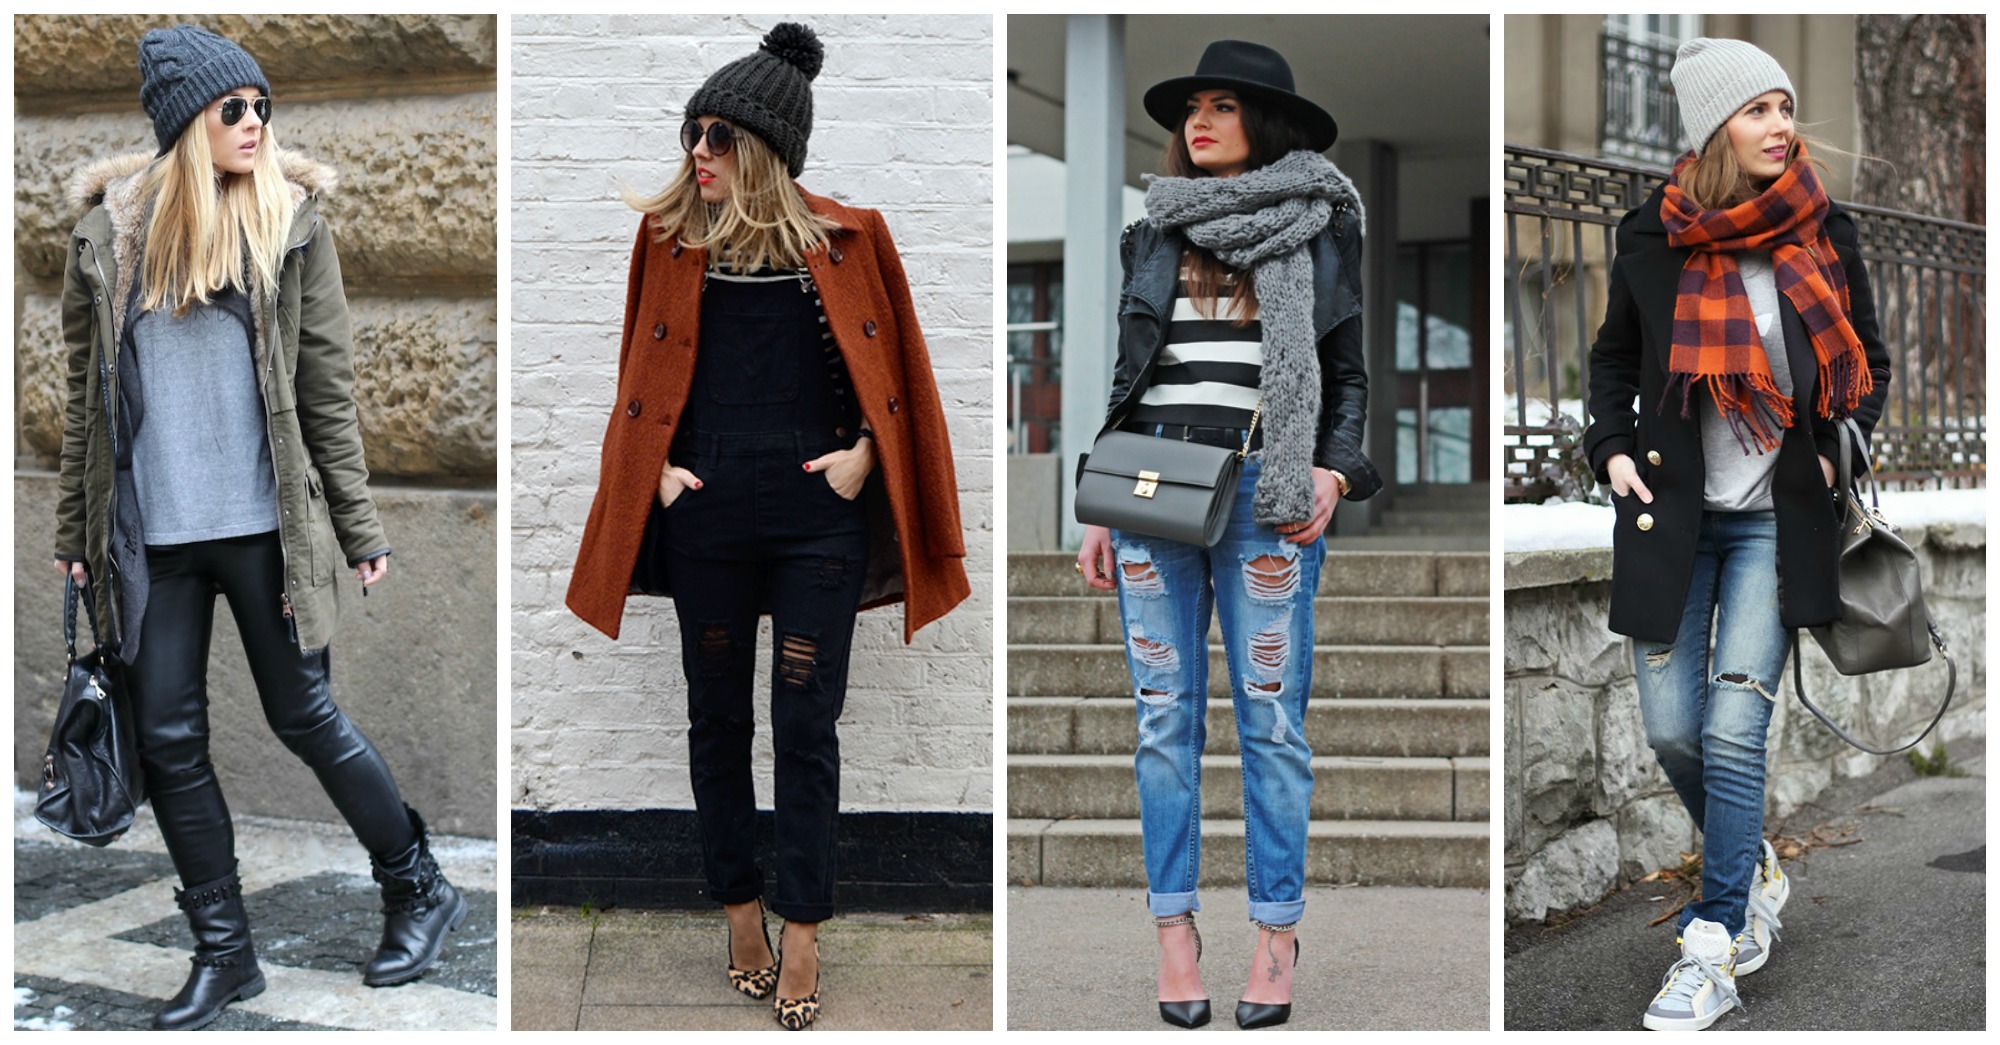 Chic Hats to Wear This Winter